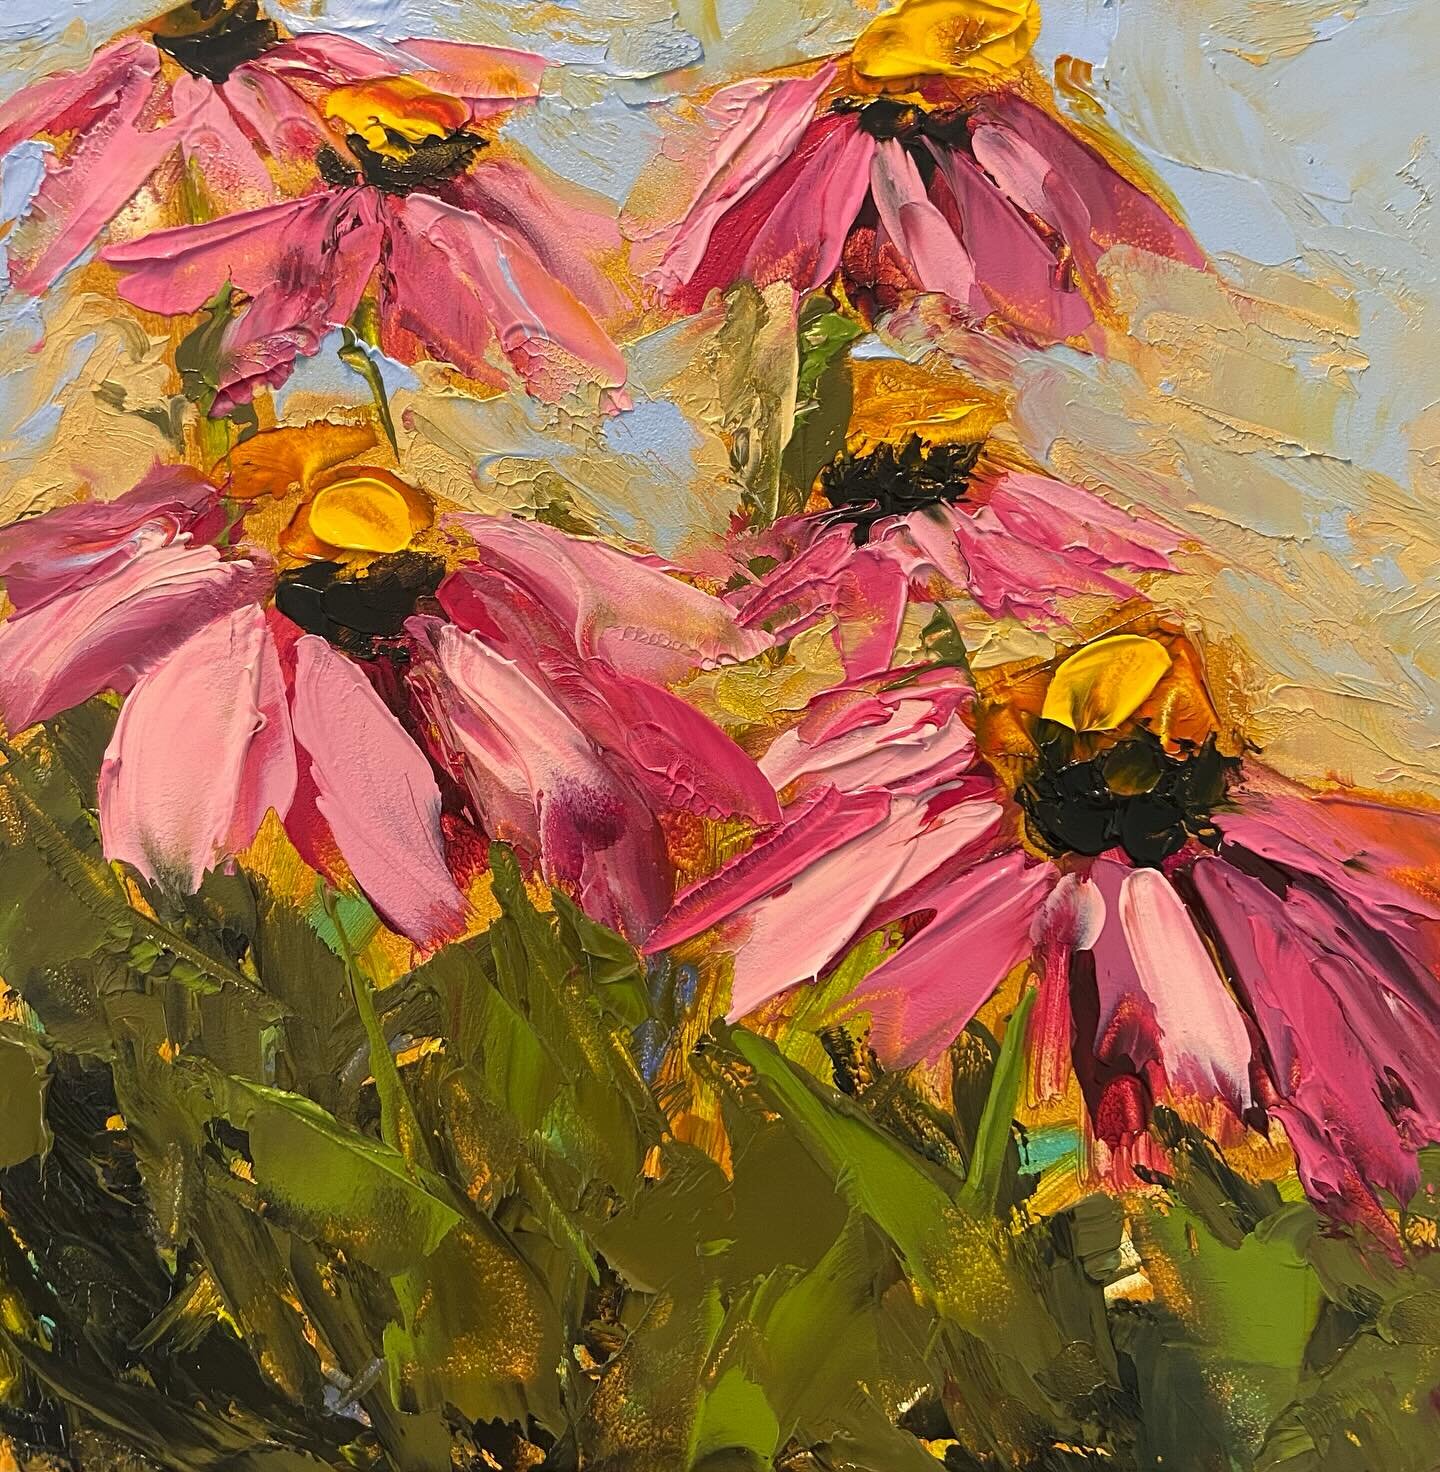 Something Different 
Oil using a palette knife 
#oilpainting #oilpaint #dailyartist #coneflowers